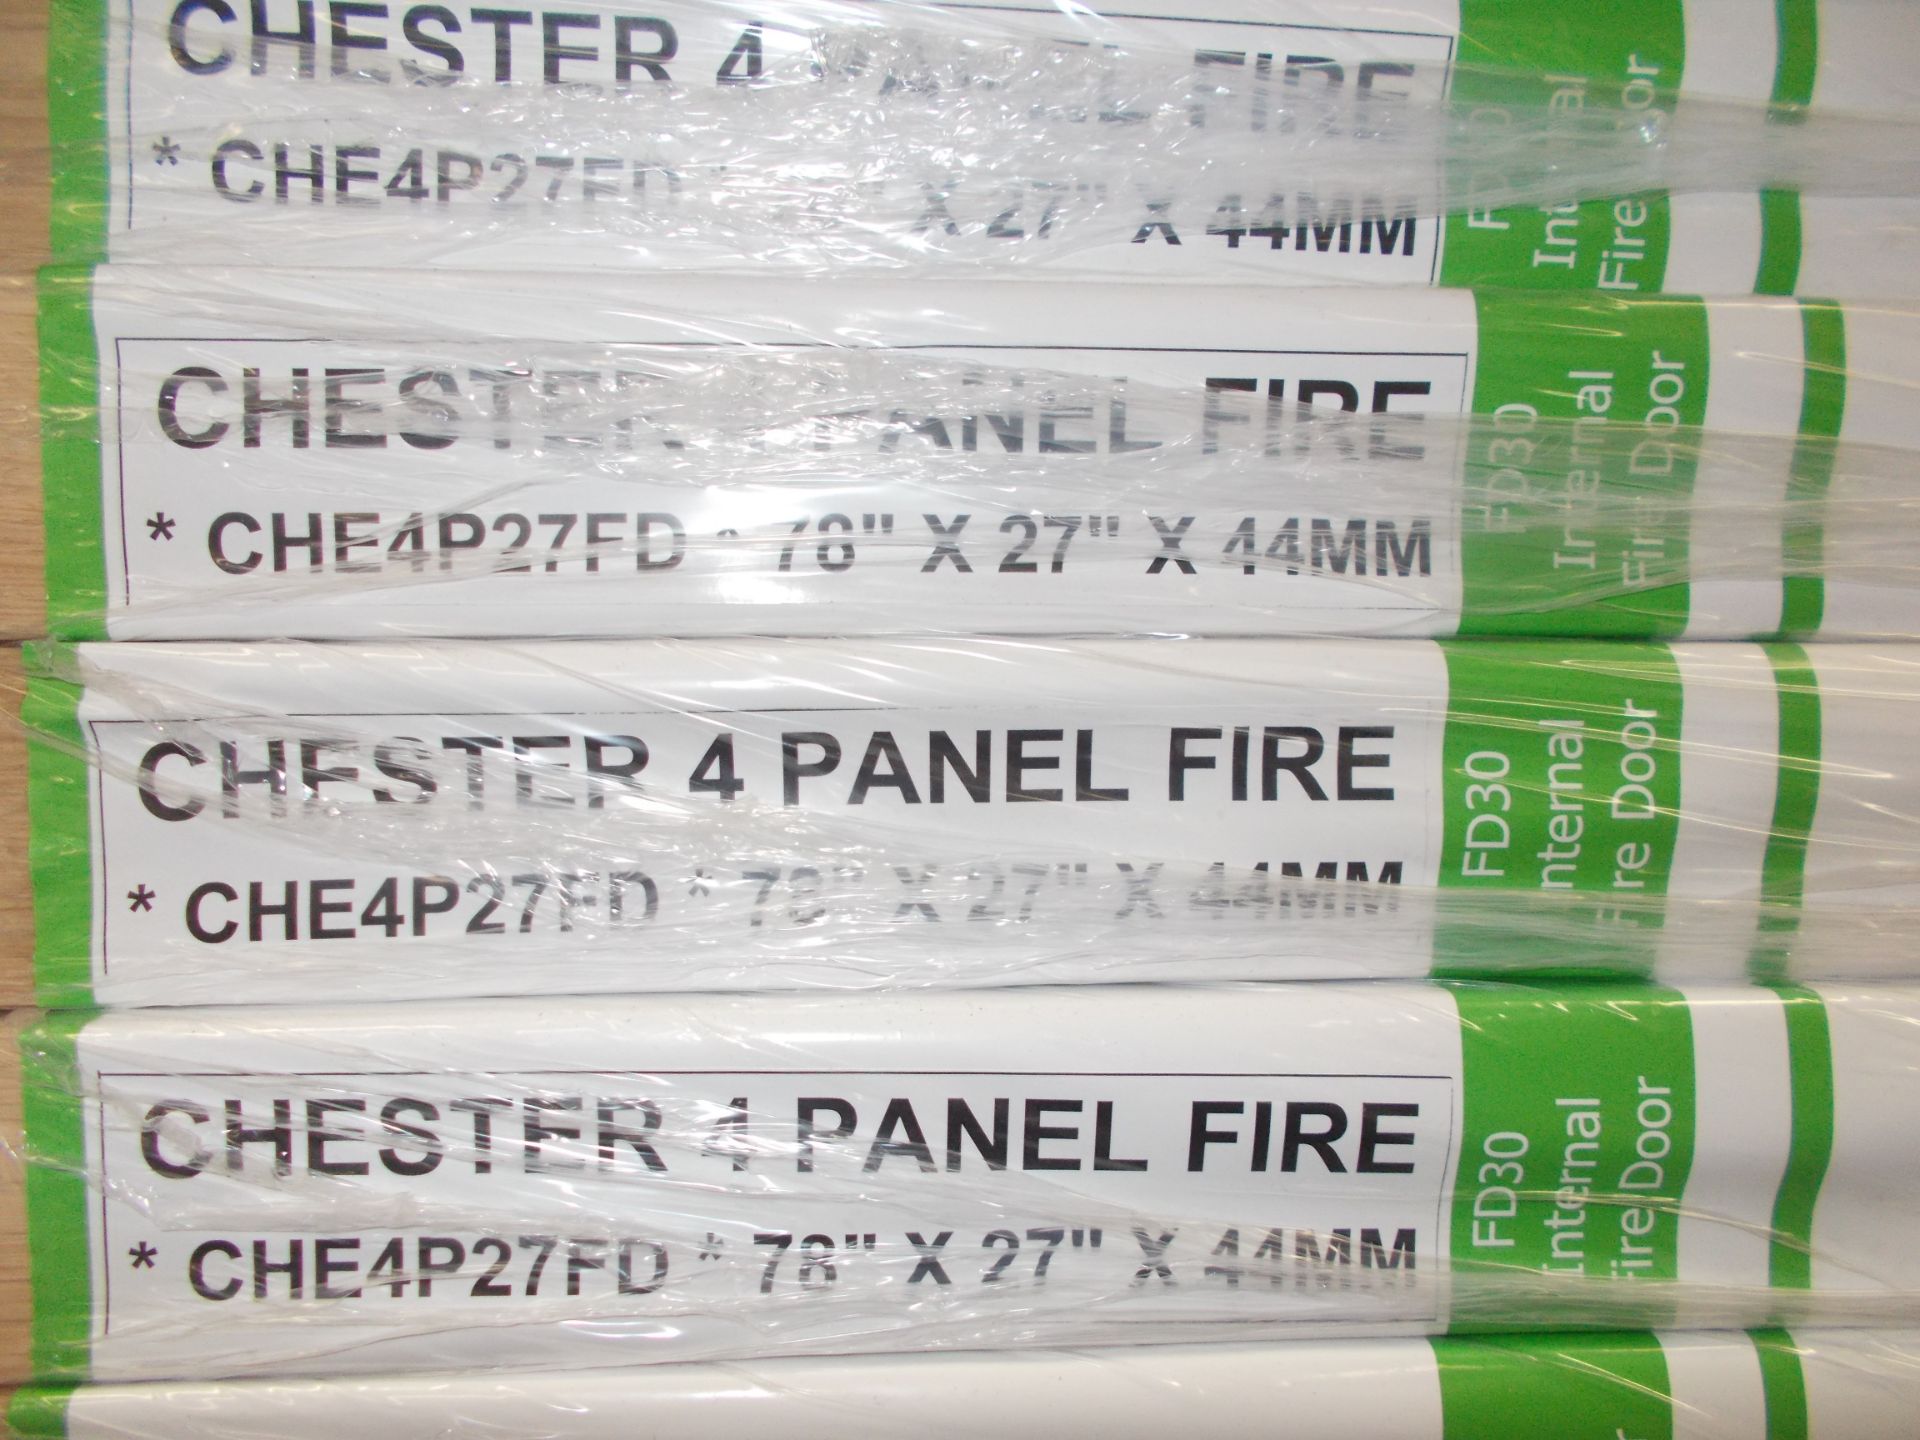 4 x Chester 4 Panel Internal Fire Door CHE4P27FD, 78”x27”x44mm - Lots to be handed out in order they - Image 3 of 3